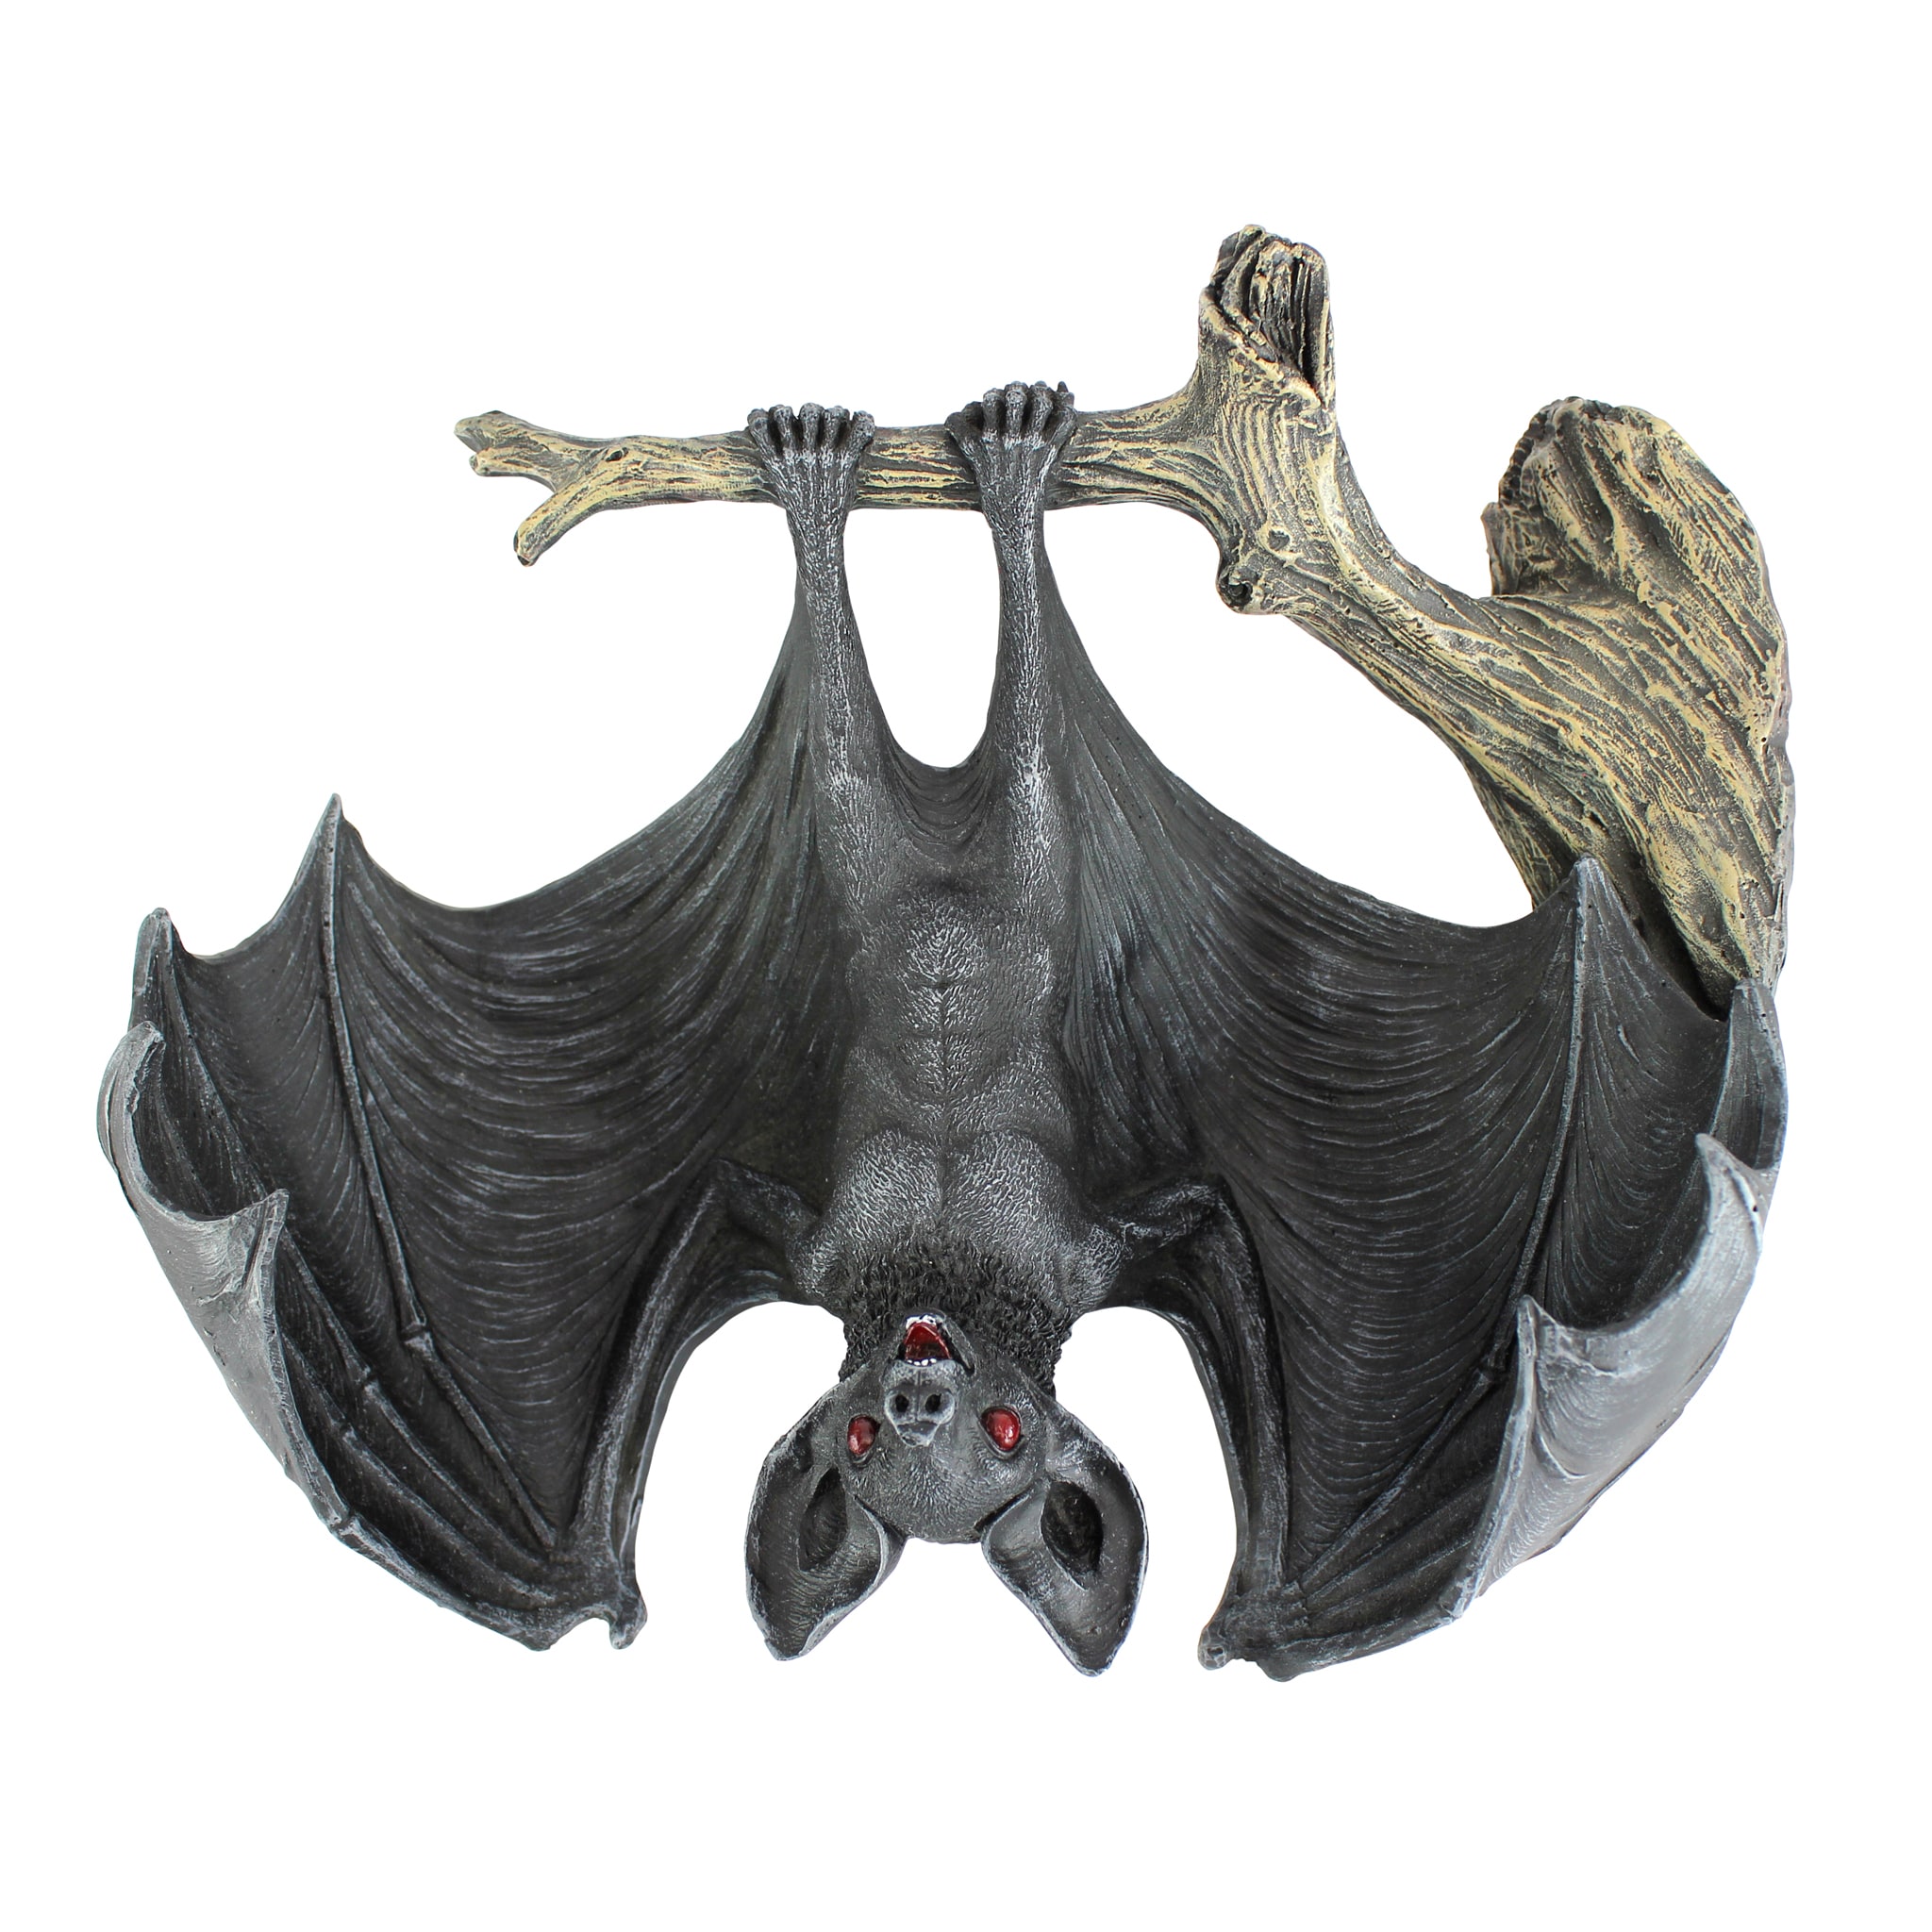 Large Black Silver Accent Bat Hanging Halloween Prop 21" Wingspan New 